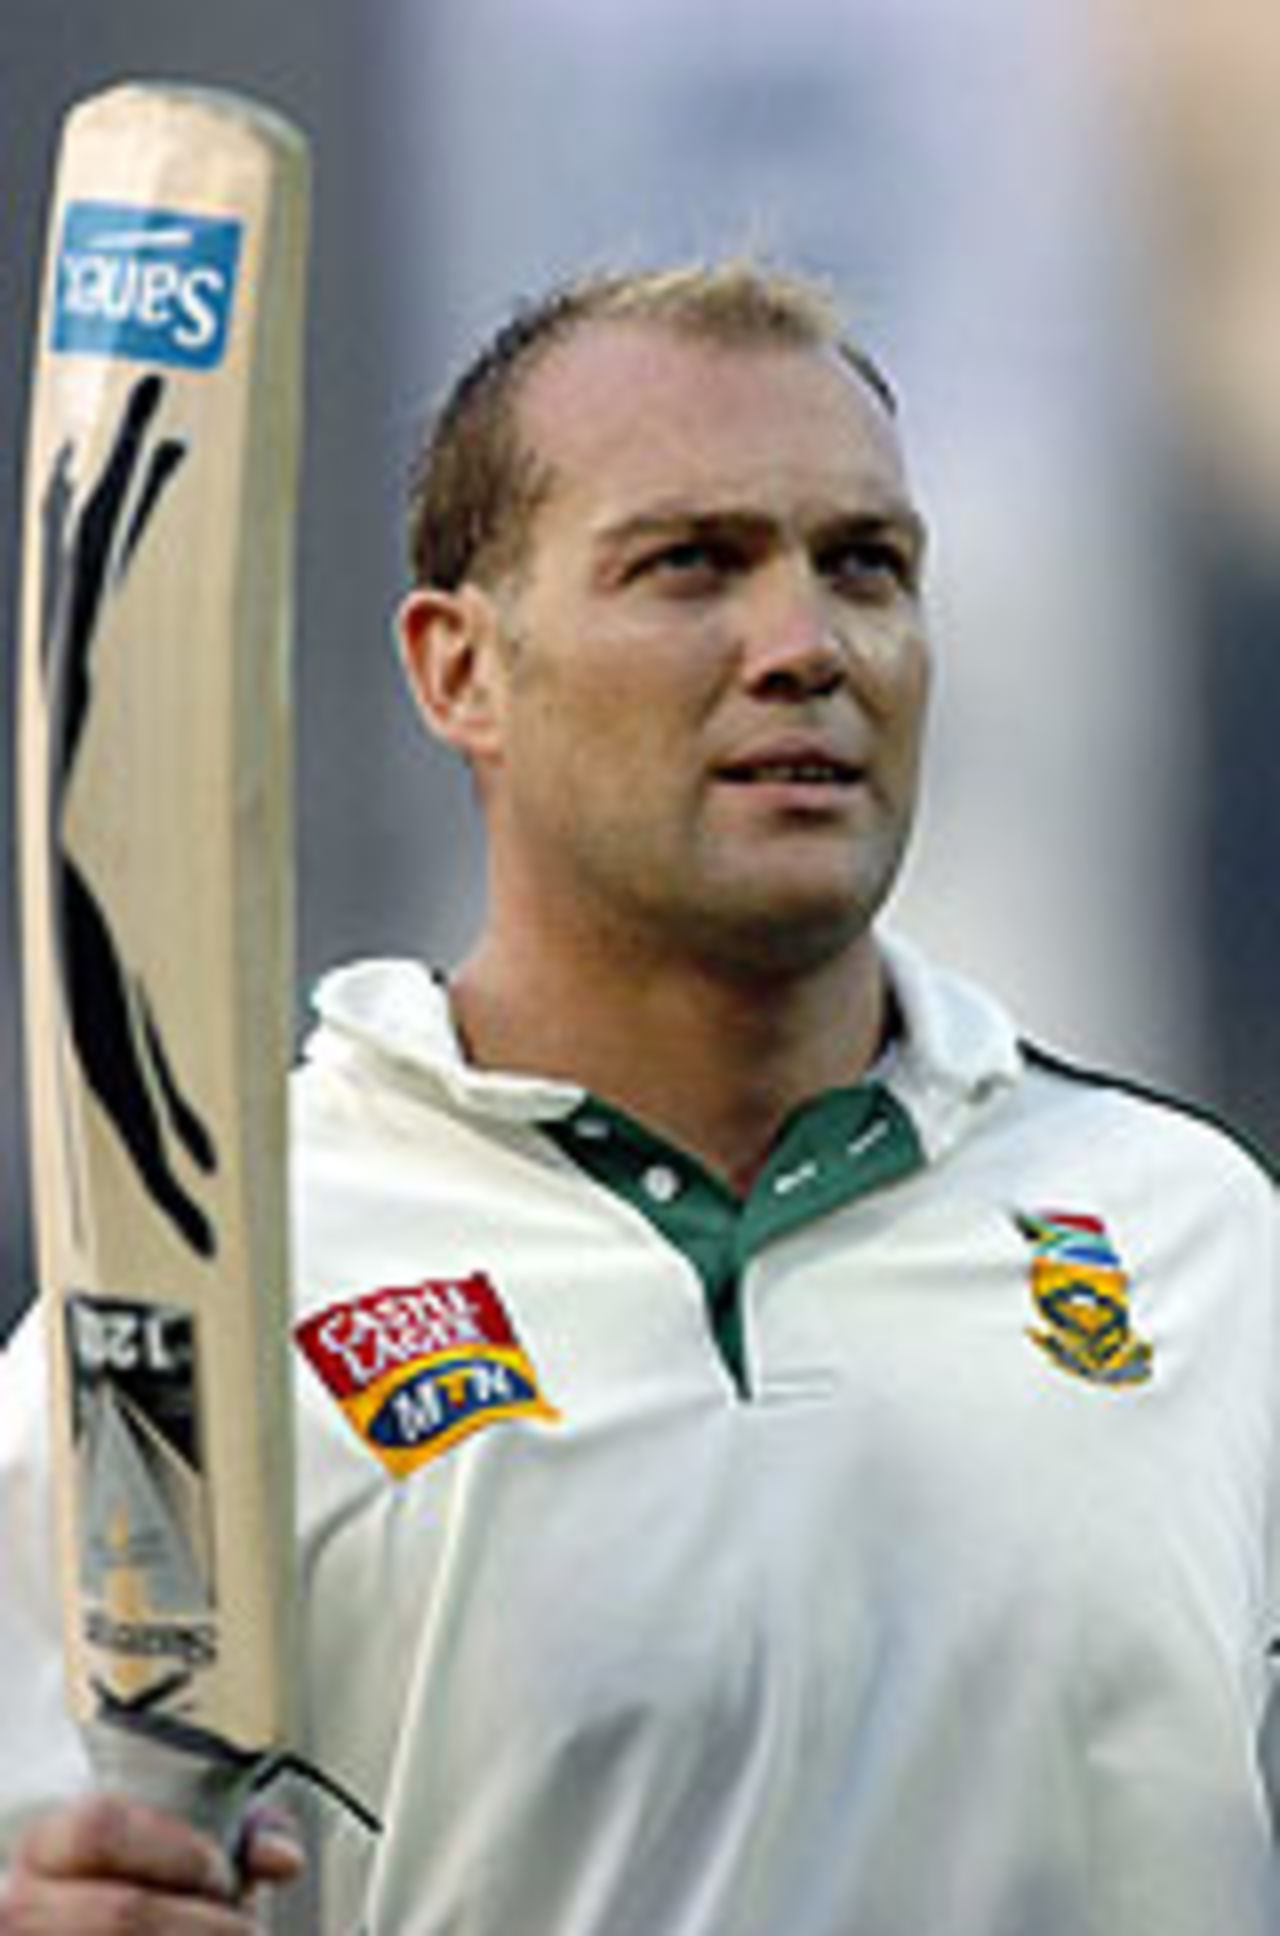 Jacques Kallis raises his bat after reaching his fifty, India v South Africa, 2nd Test, Eden Gardens, December 1, 2004